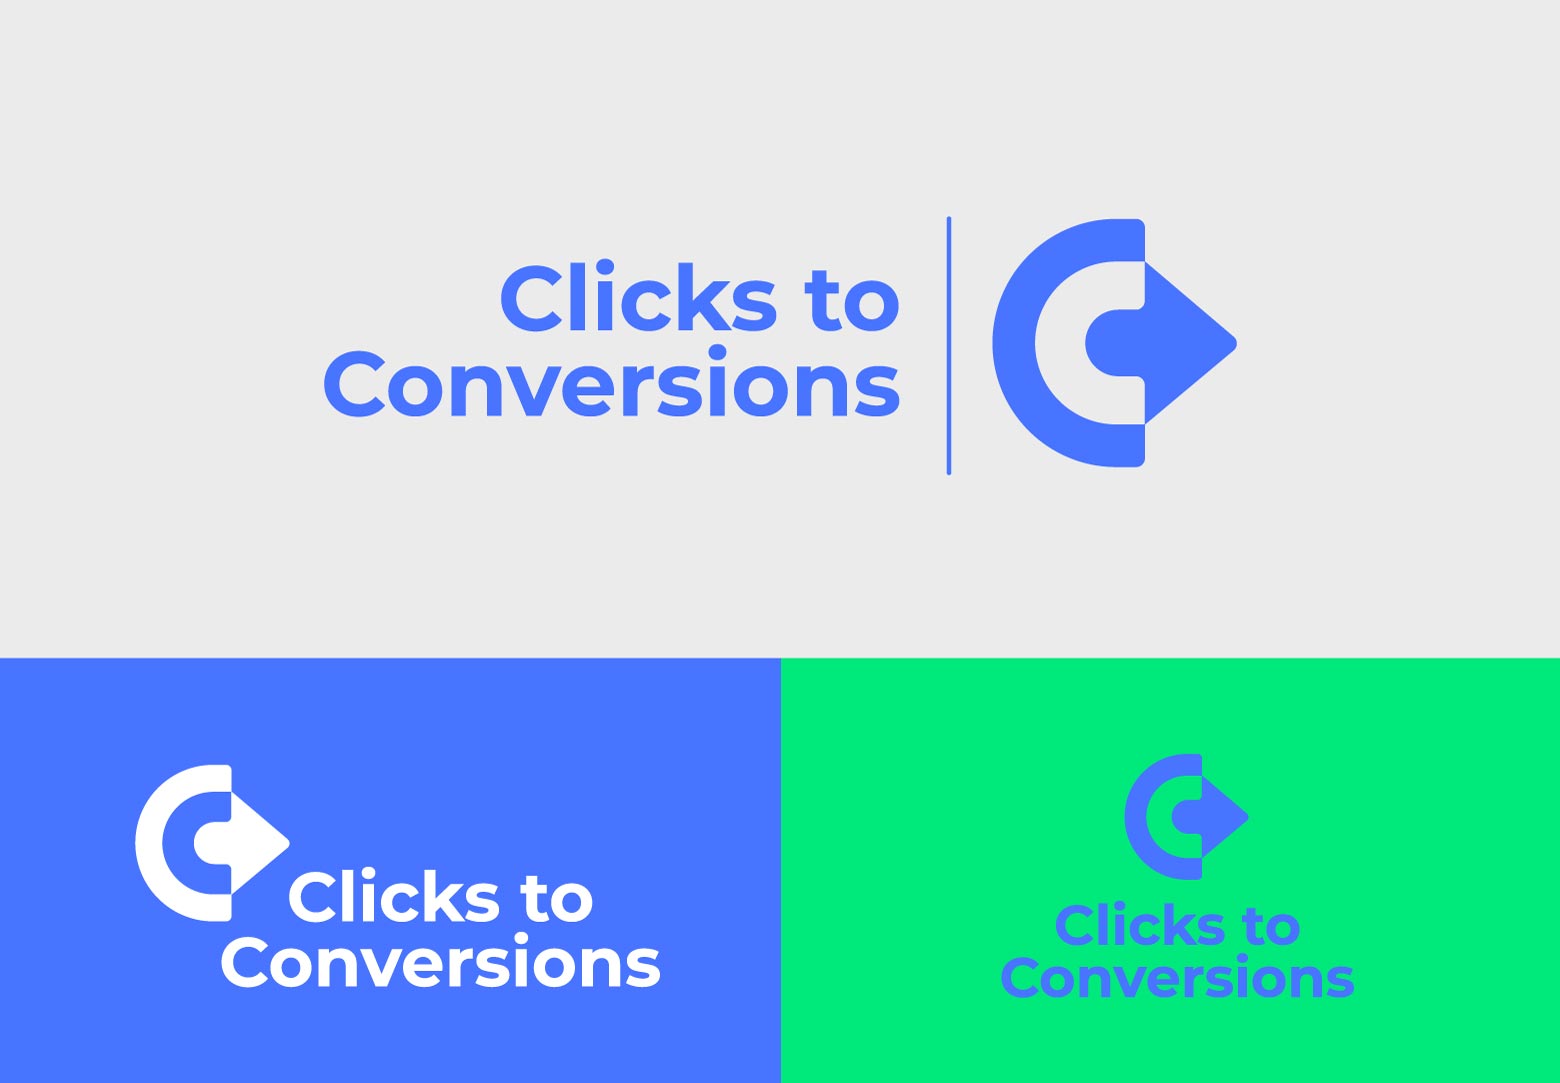 Clicks to Conversions branding and web design by StudioD